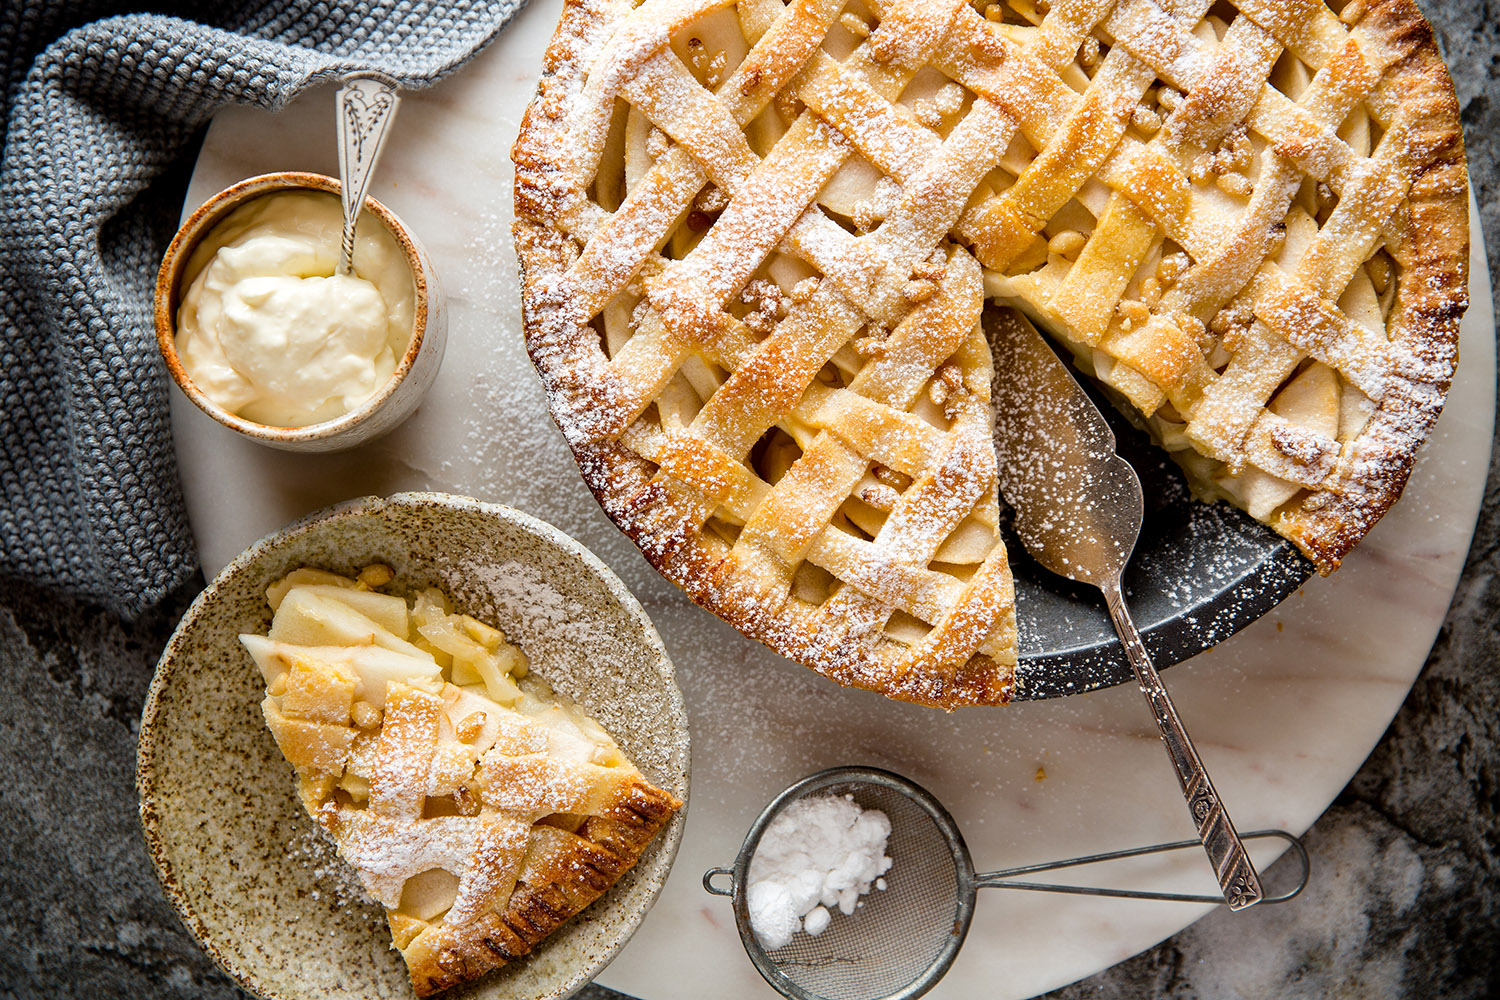 We Can Tell If You’re Weird or Not Weird Based on Whether You Eat These Foods With a 🍴Fork or Spoon Apple pie and clotted cream